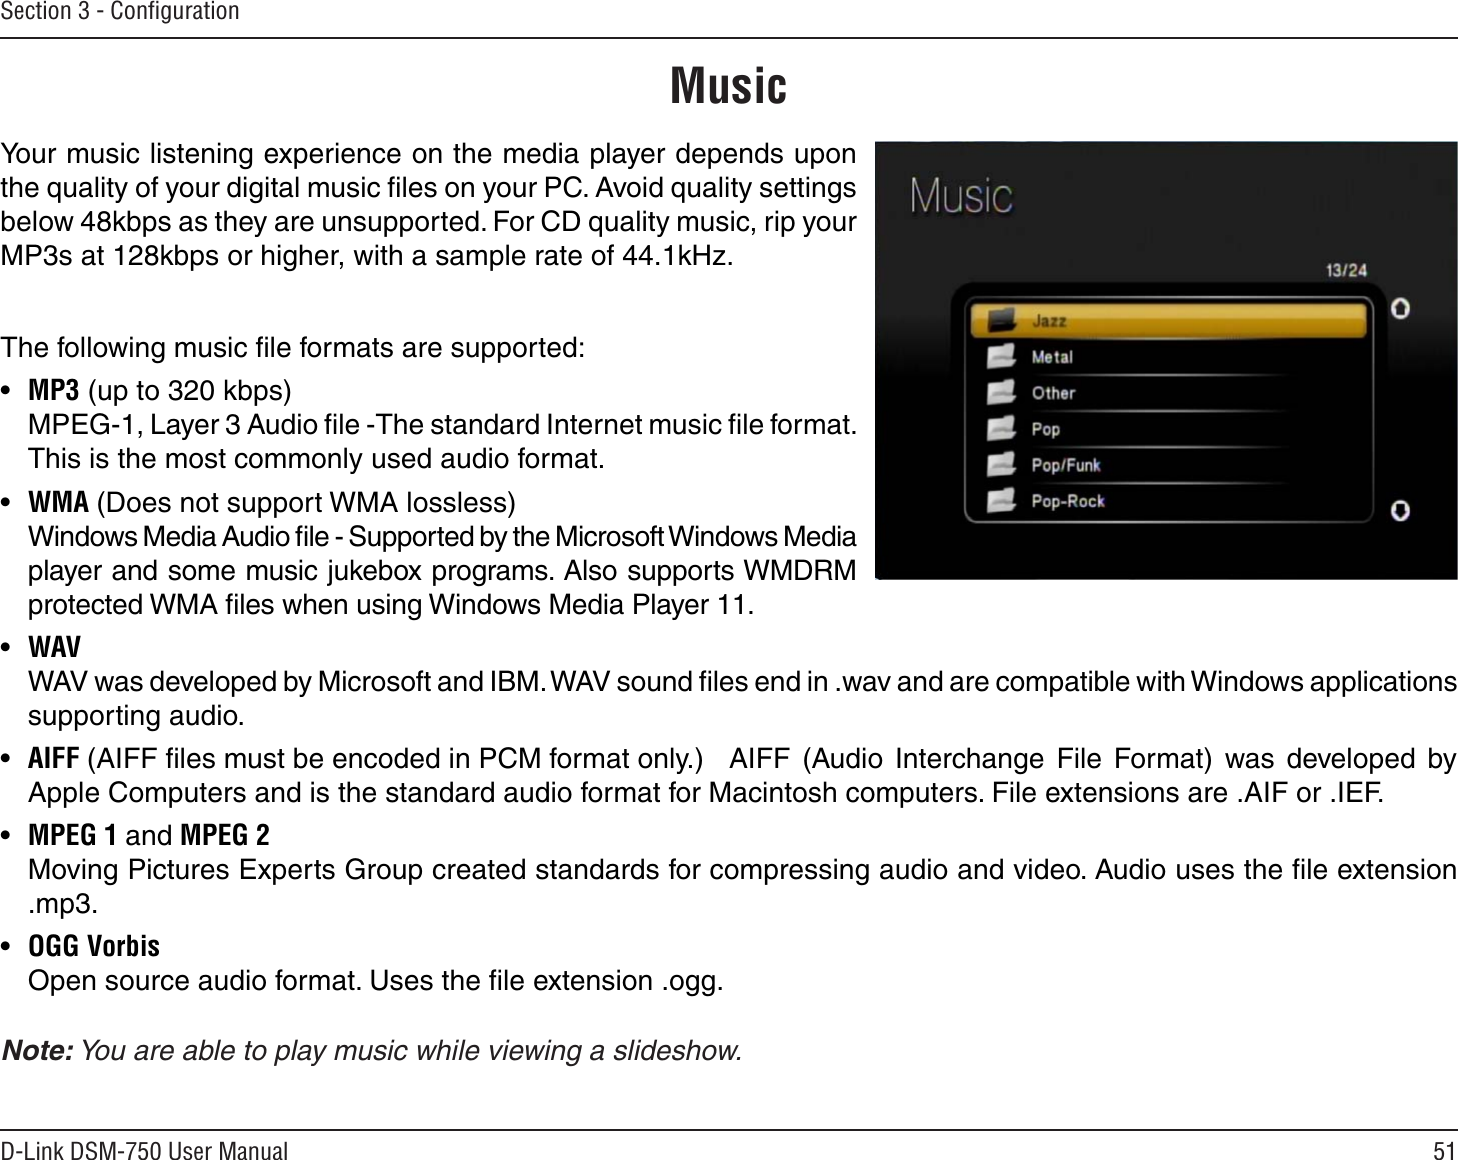 51D-Link DSM-750 User ManualSection 3 - ConﬁgurationYour music listening experience on the media player depends upon the quality of your digital music ﬁles on your PC. Avoid quality settings below 48kbps as they are unsupported. For CD quality music, rip your MP3s at 128kbps or higher, with a sample rate of 44.1kHz.The following music ﬁle formats are supported:•  MP3 (up to 320 kbps)  MPEG-1, Layer 3 Audio ﬁle -The standard Internet music ﬁle format. This is the most commonly used audio format.•  WMA (Does not support WMA lossless)    Windows Media Audio ﬁle - Supported by the Microsoft Windows Media player and some music jukebox programs. Also supports WMDRM protected WMA ﬁles when using Windows Media Player 11.•  WAV    WAV was developed by Microsoft and IBM. WAV sound ﬁles end in .wav and are compatible with Windows applications supporting audio.•  AIFF (AIFF ﬁles must be encoded in PCM format only.) AIFF  (Audio  Interchange  File  Format)  was  developed  by Apple Computers and is the standard audio format for Macintosh computers. File extensions are .AIF or .IEF.•  MPEG 1 and MPEG 2    Moving Pictures Experts Group created standards for compressing audio and video. Audio uses the ﬁle extension .mp3.•  OGG Vorbis    Open source audio format. Uses the ﬁle extension .ogg.  Note: You are able to play music while viewing a slideshow.Music